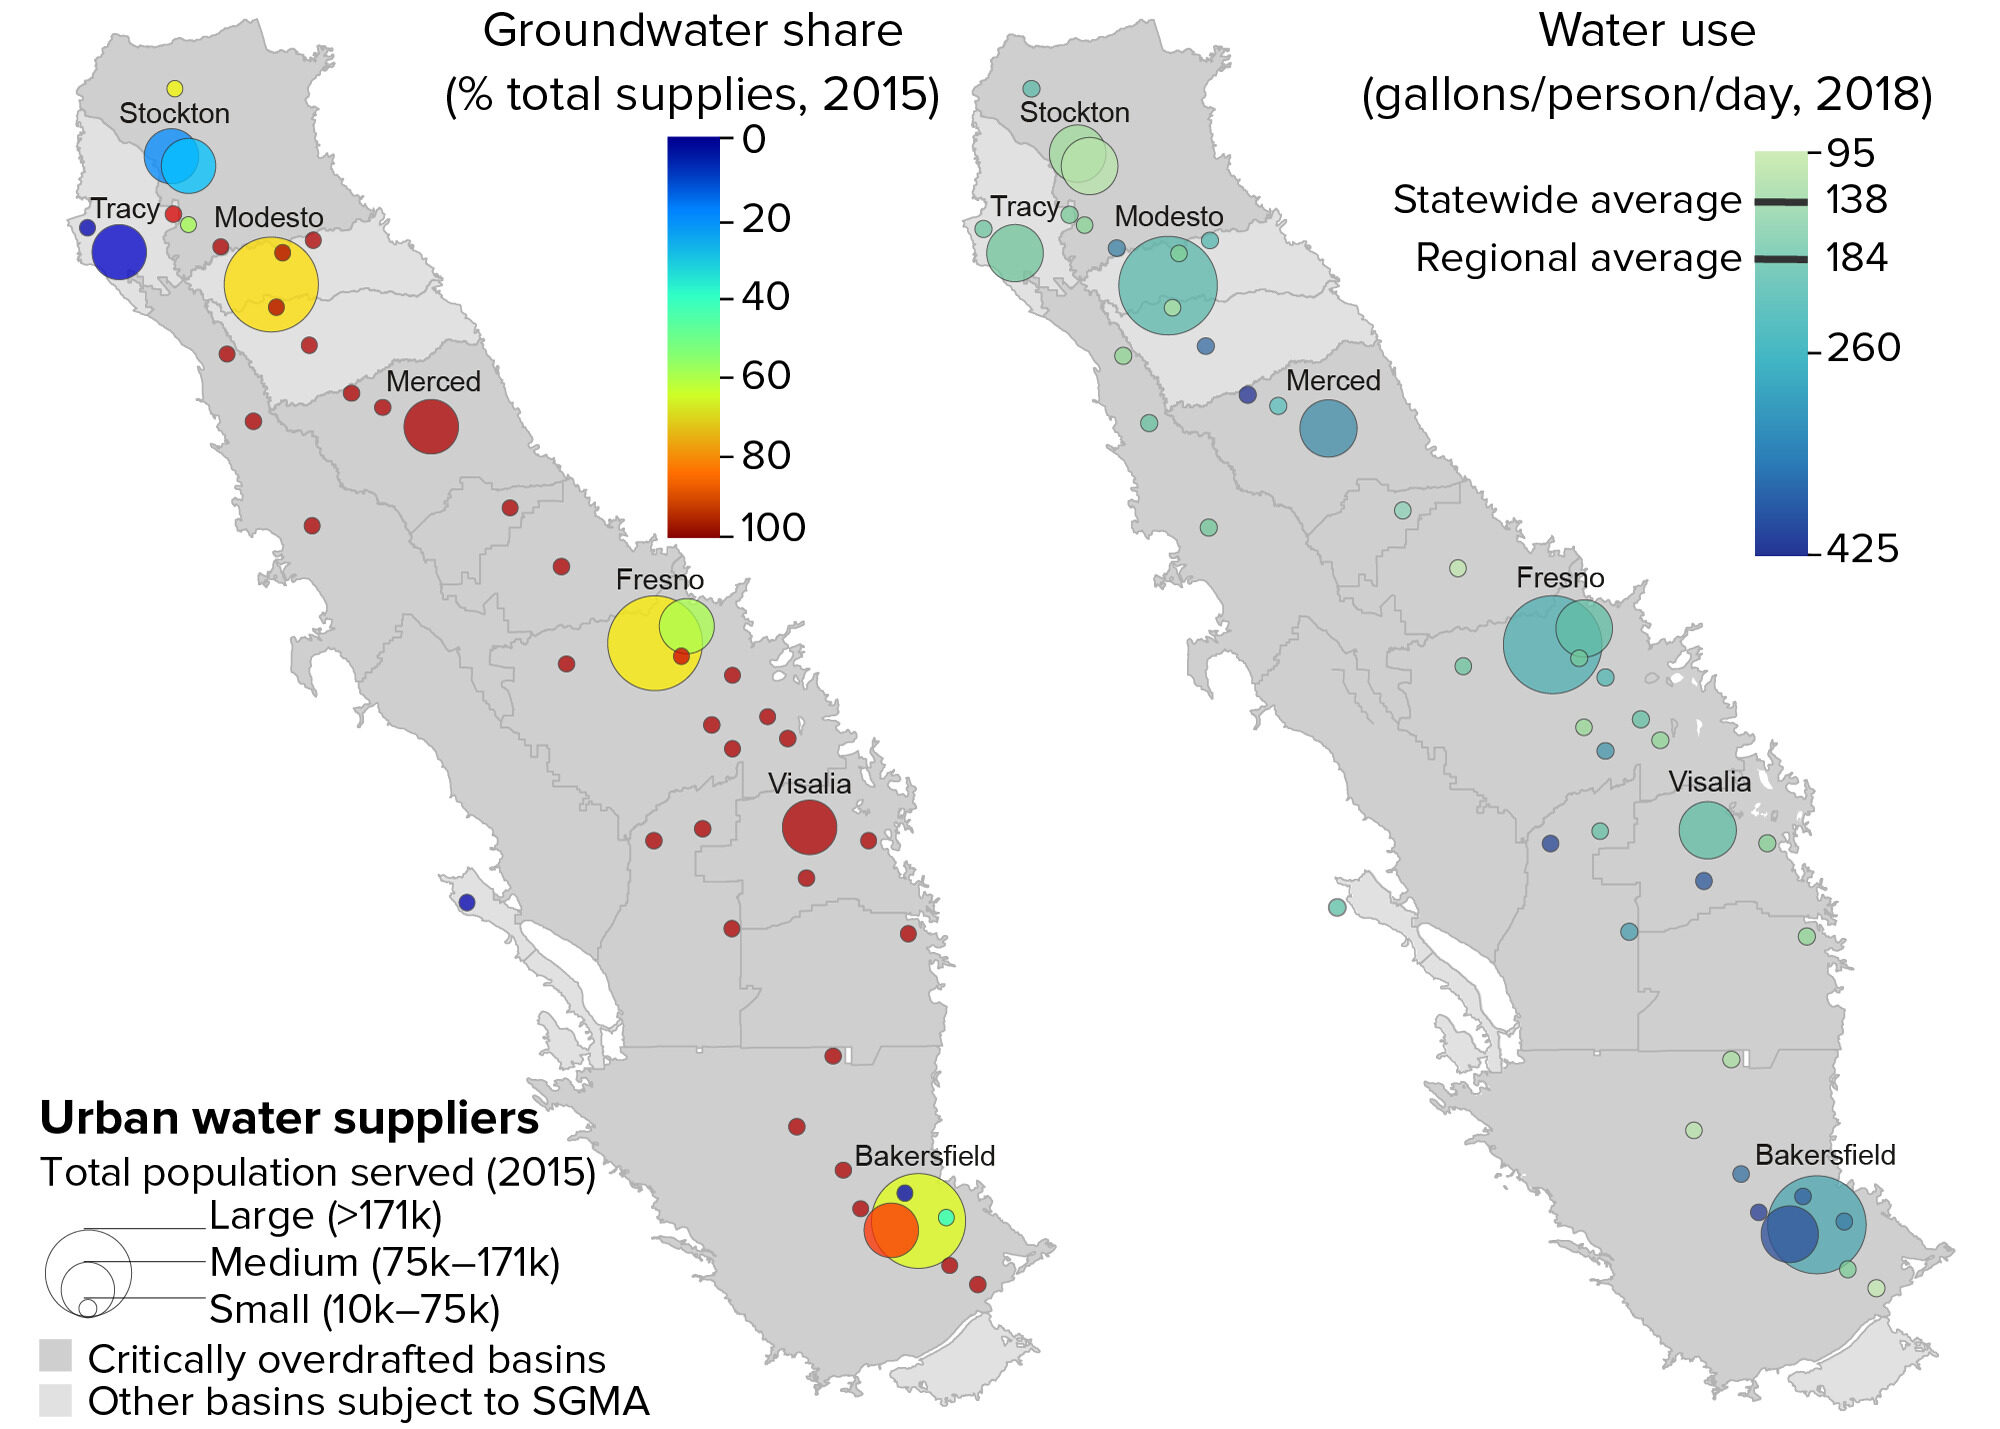 figure - Groundwater reliance is prevalent, and water use is higher than the statewide average